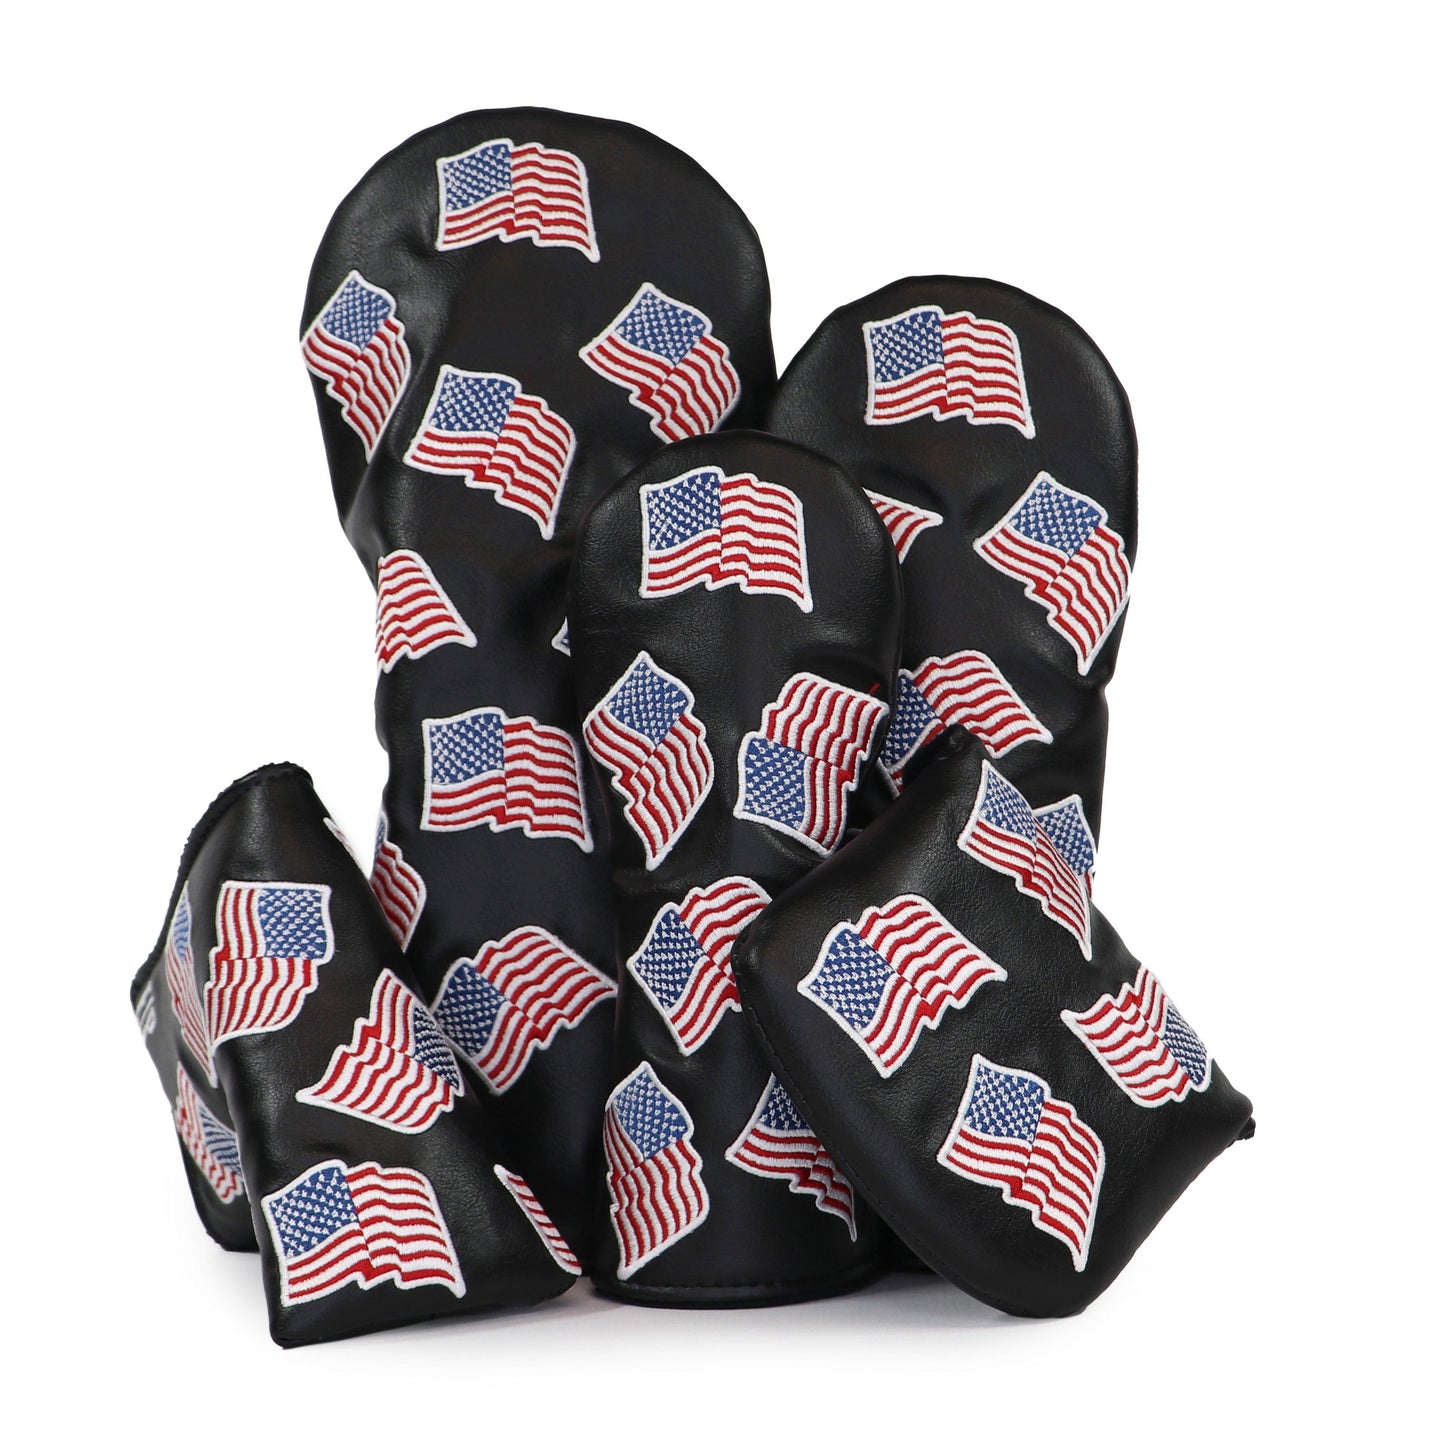 Black USA Flags Cover - EP Headcovers